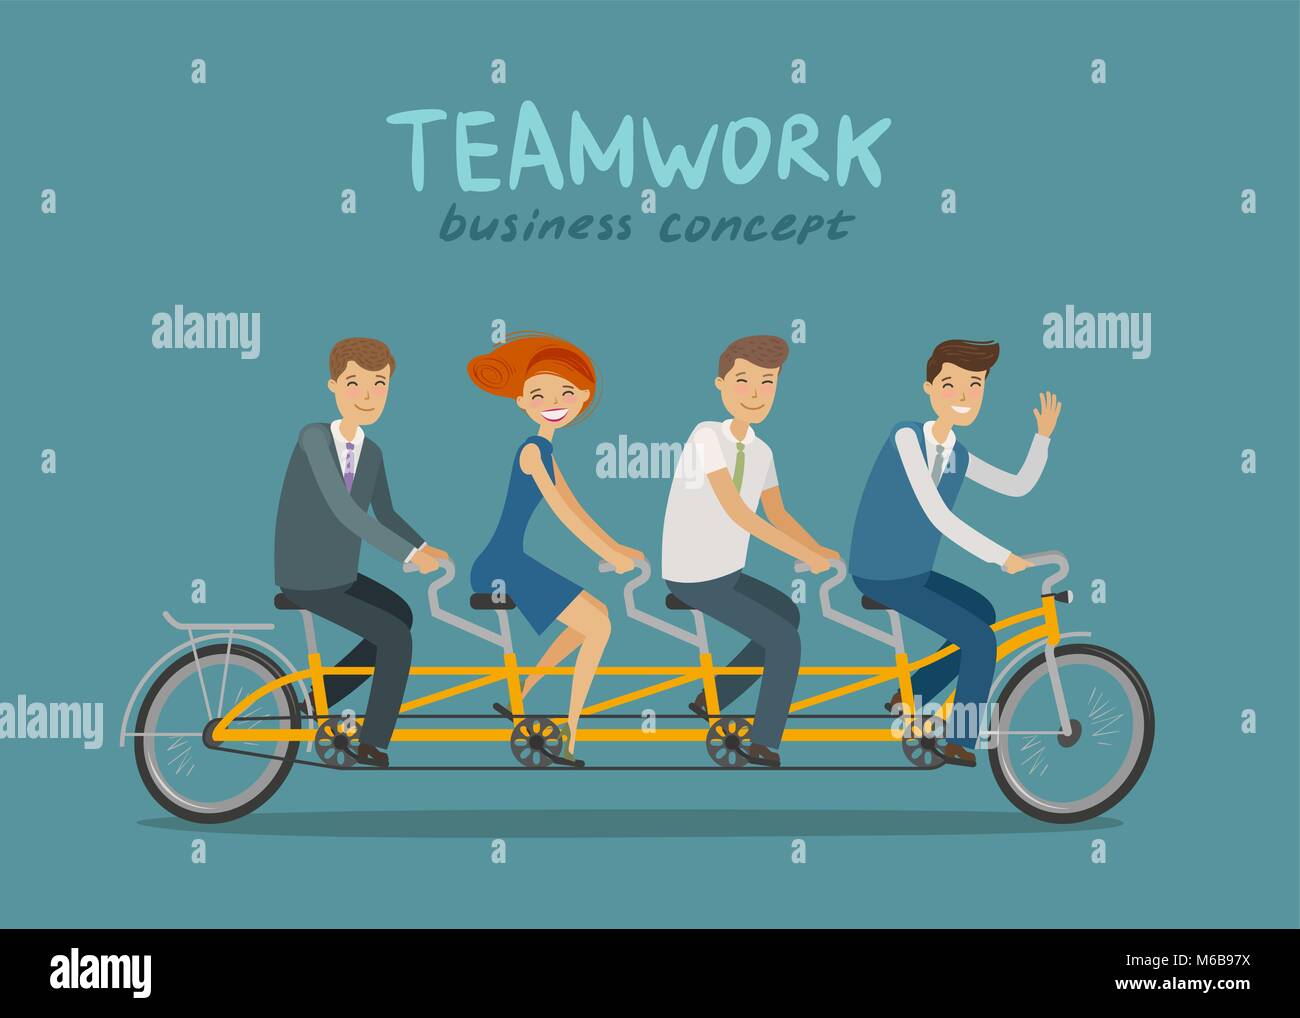 Teamwork, business concept. Business people or students riding tandem bike. Cartoon vector illustration Stock Vector